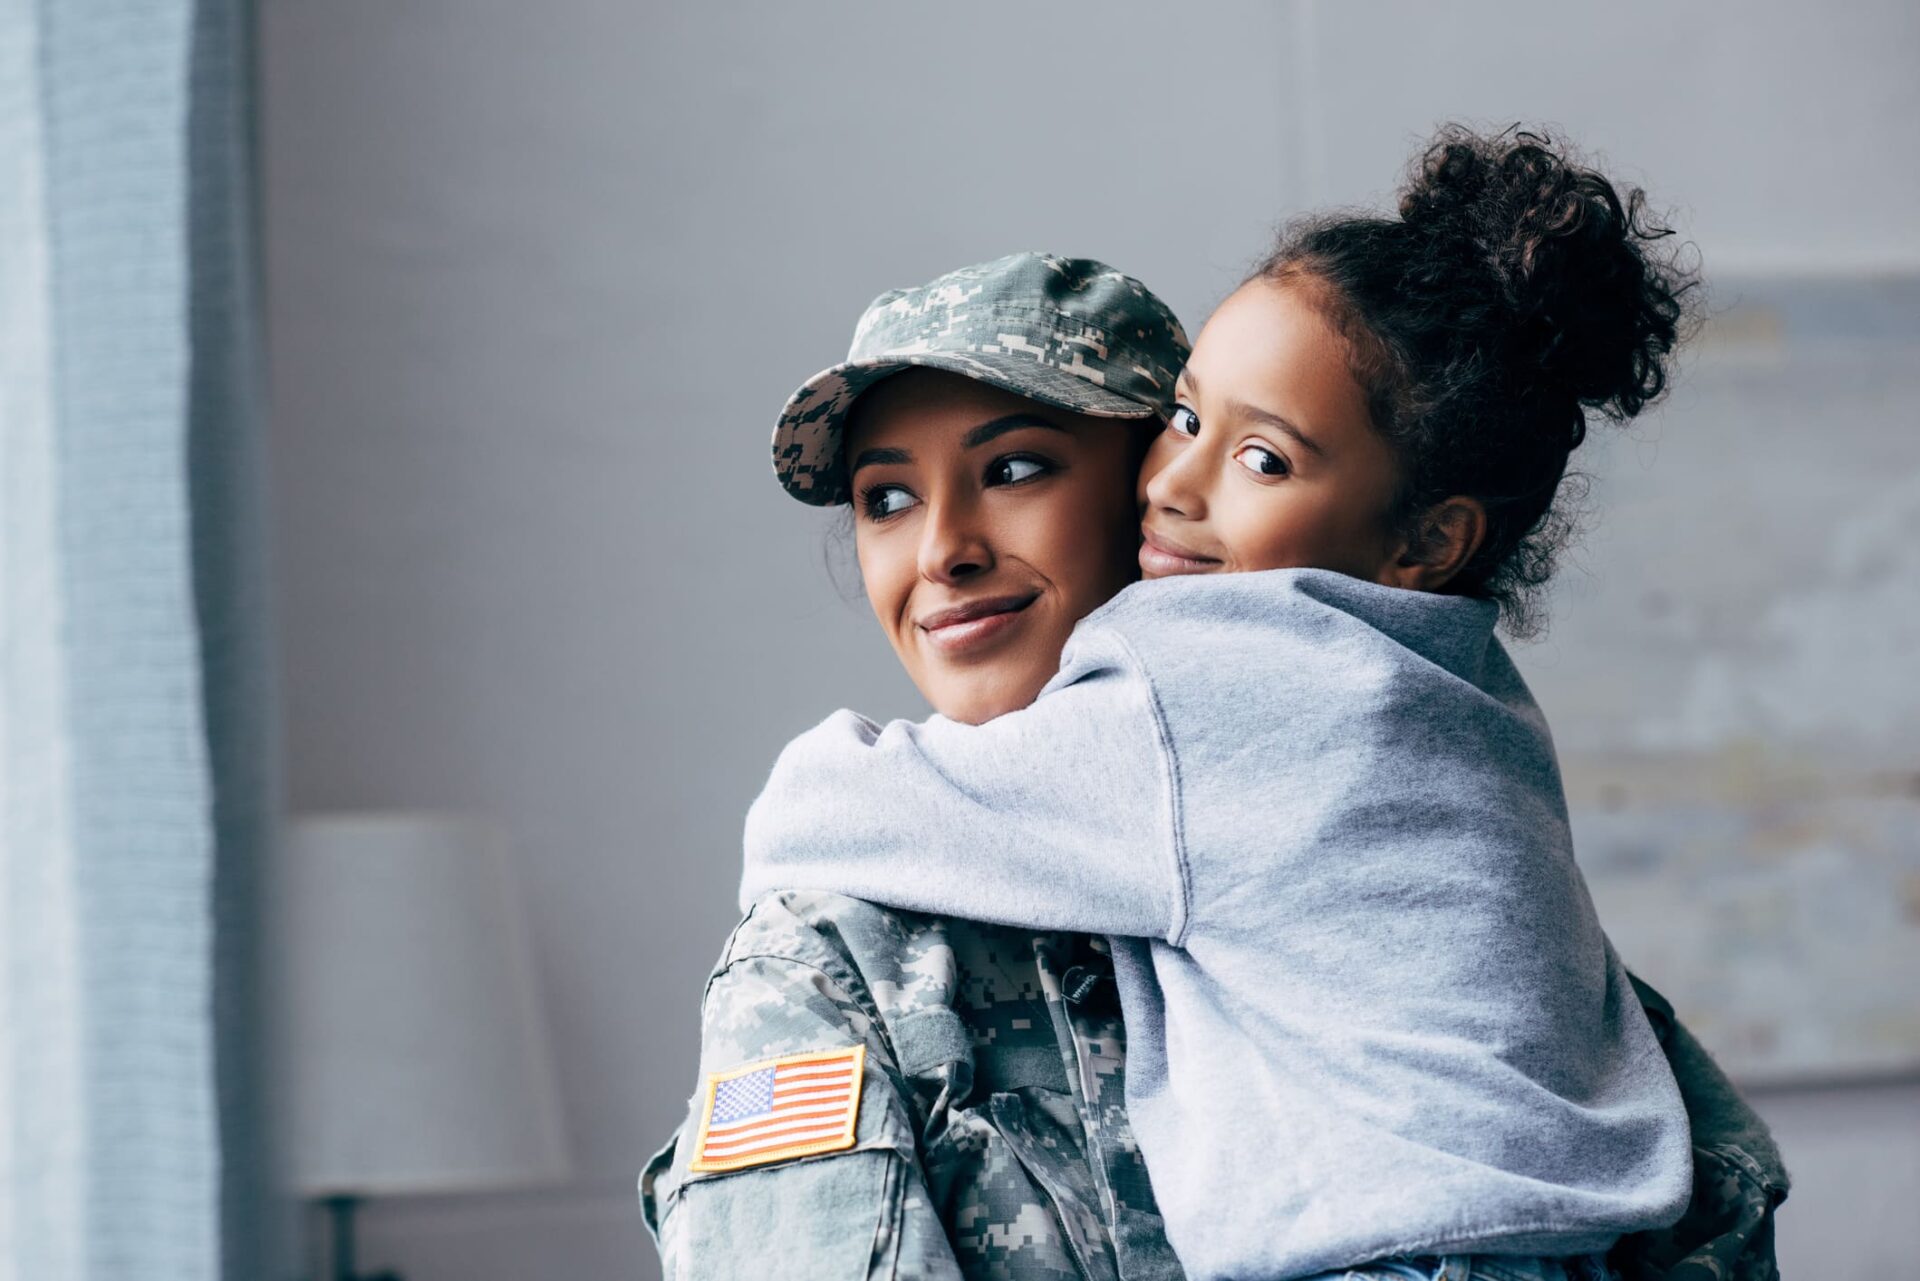 Mother with a military uniform hugging her daughter